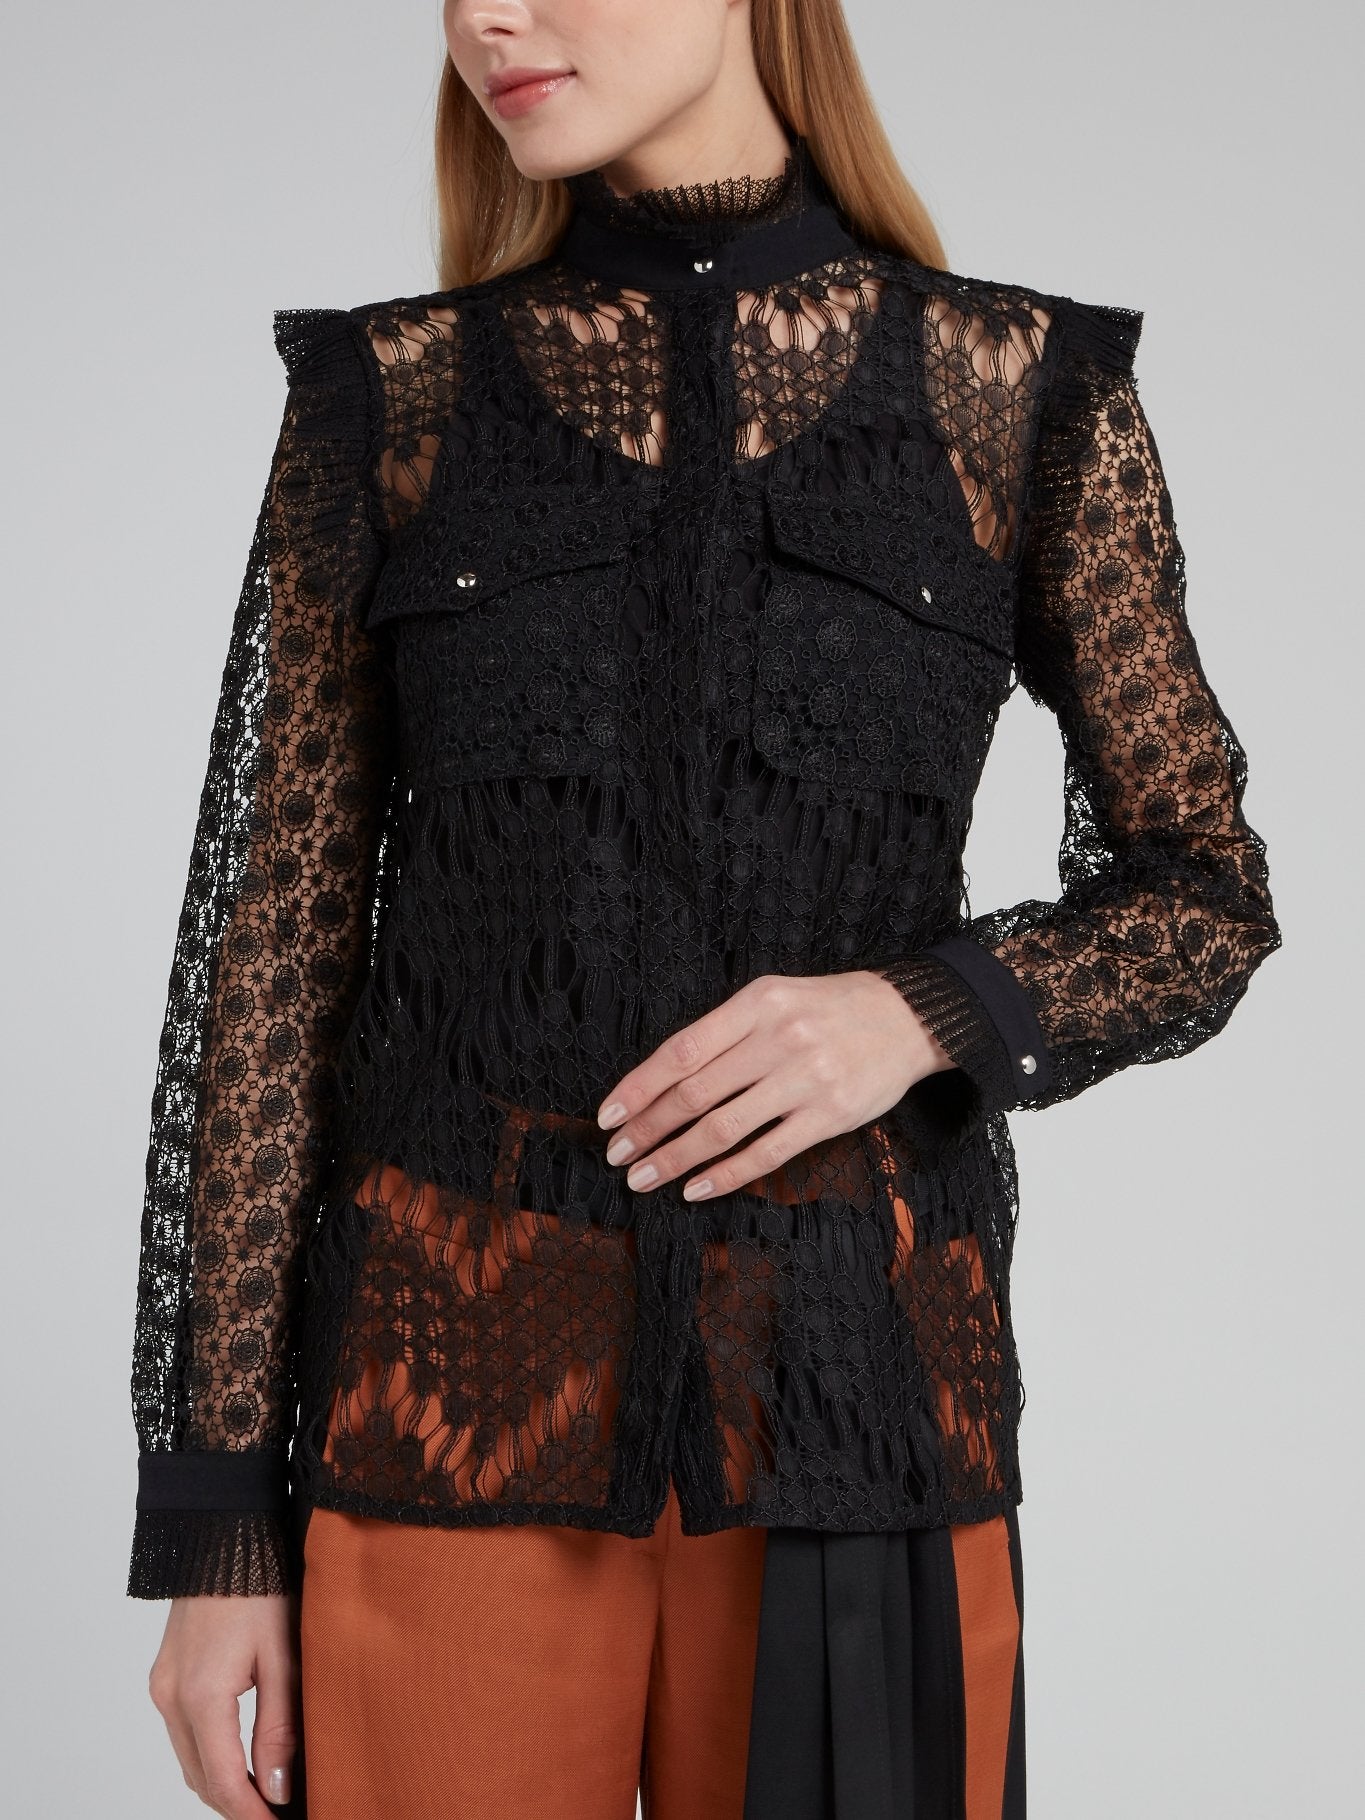 Black Frill Detail Lace Top